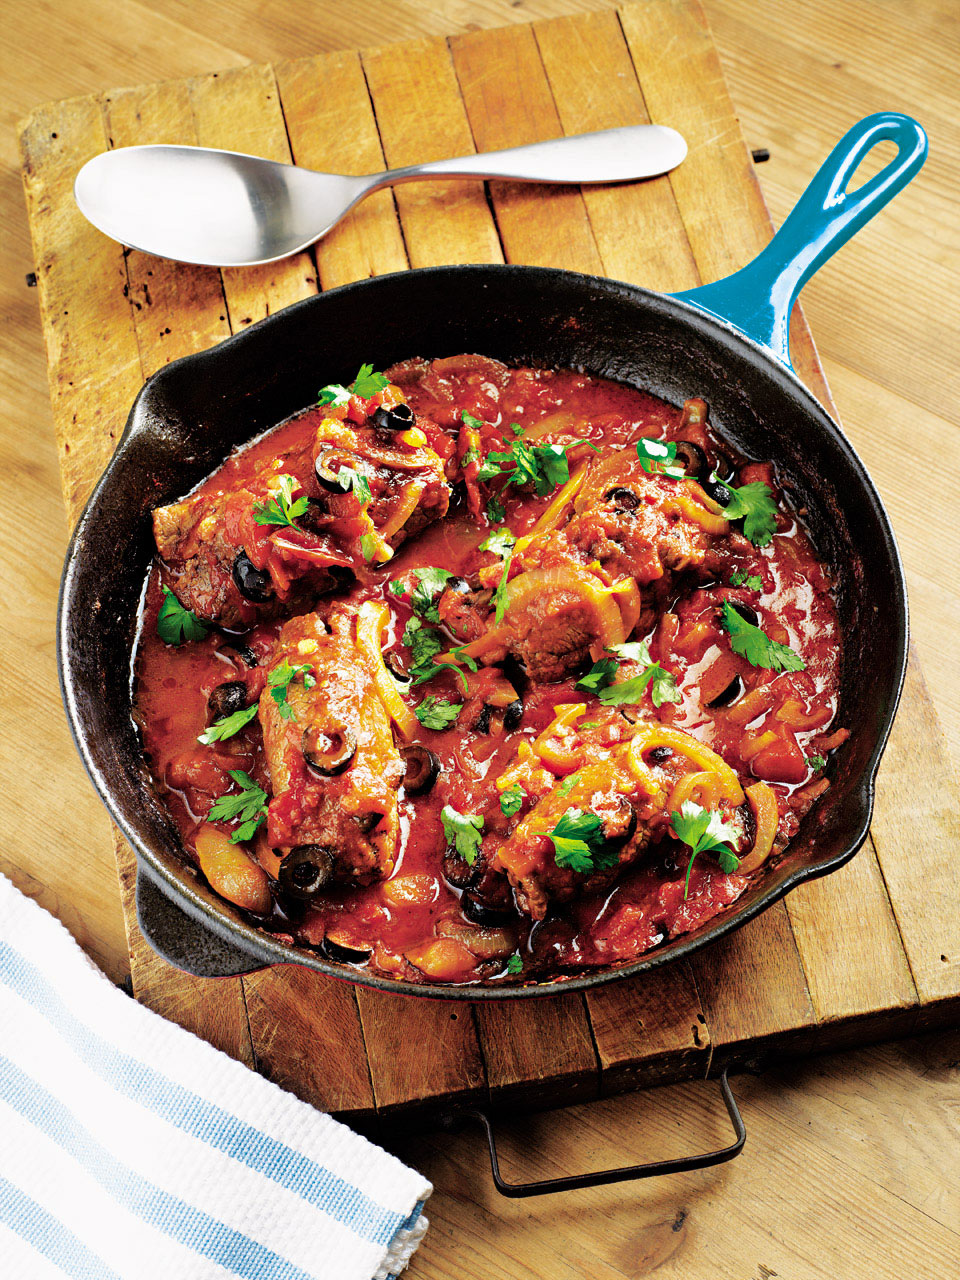 Stuffed beef rolls in a tomato and olive sauce - delicious. magazine